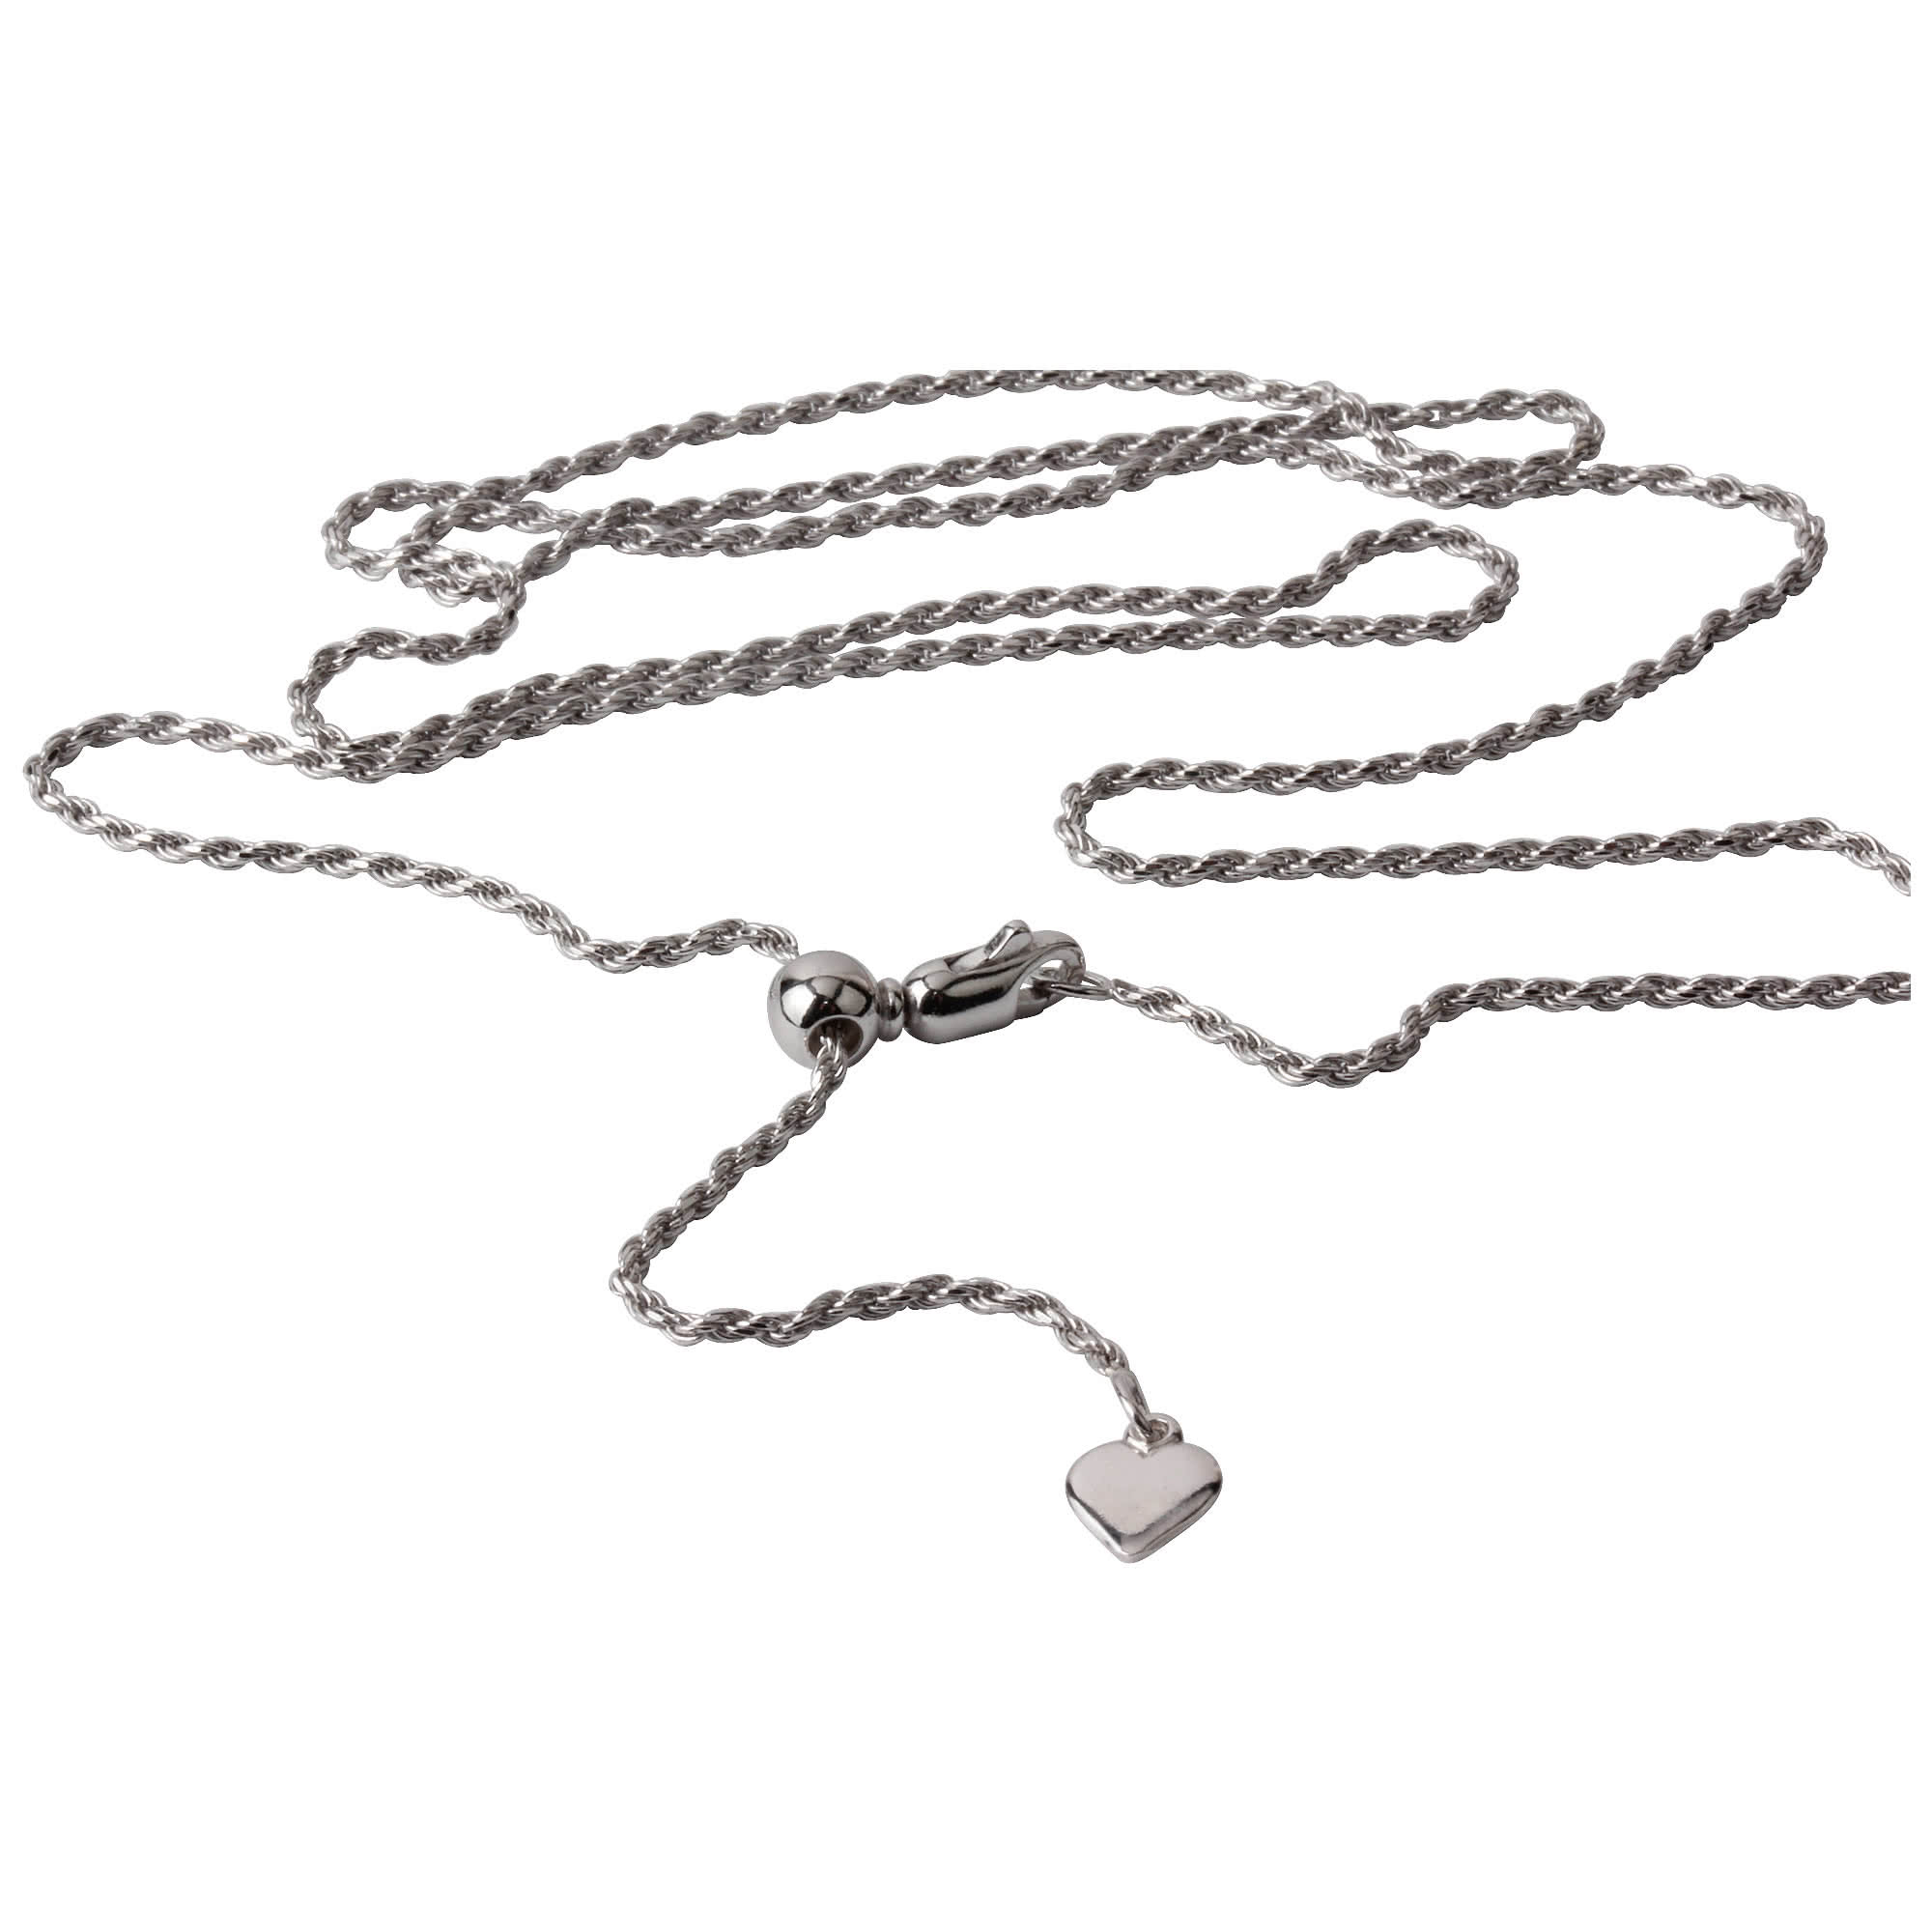 Adjustable Sterling Silver Rhodium Plated Adjustable Pendant Chain